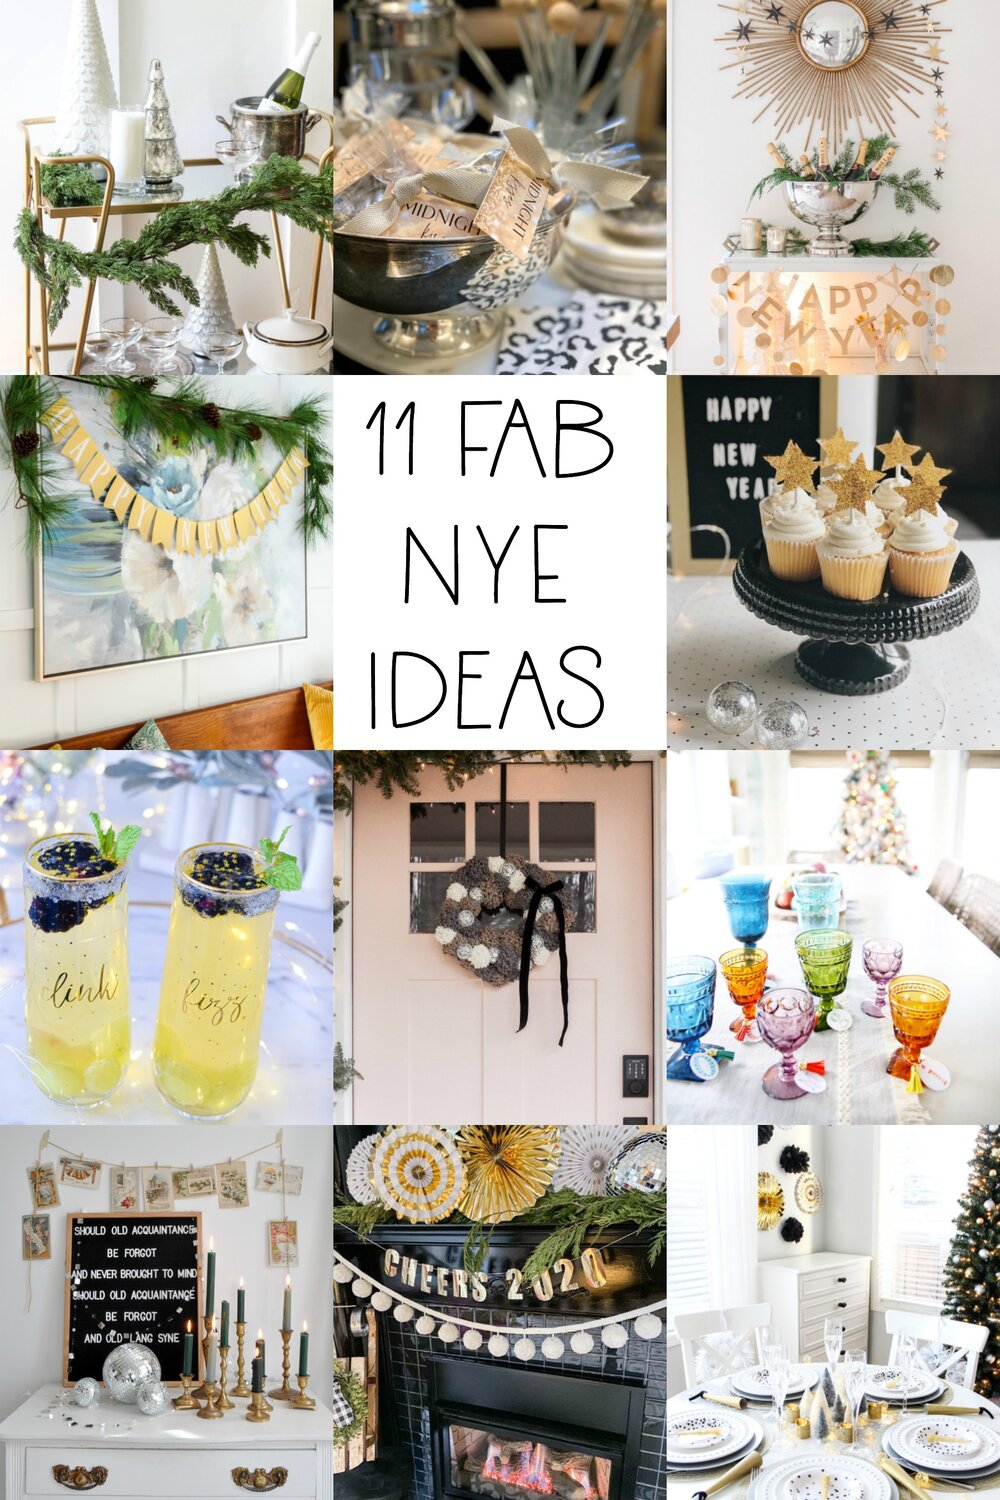 New Year's Eve Ideas to Try.jpg